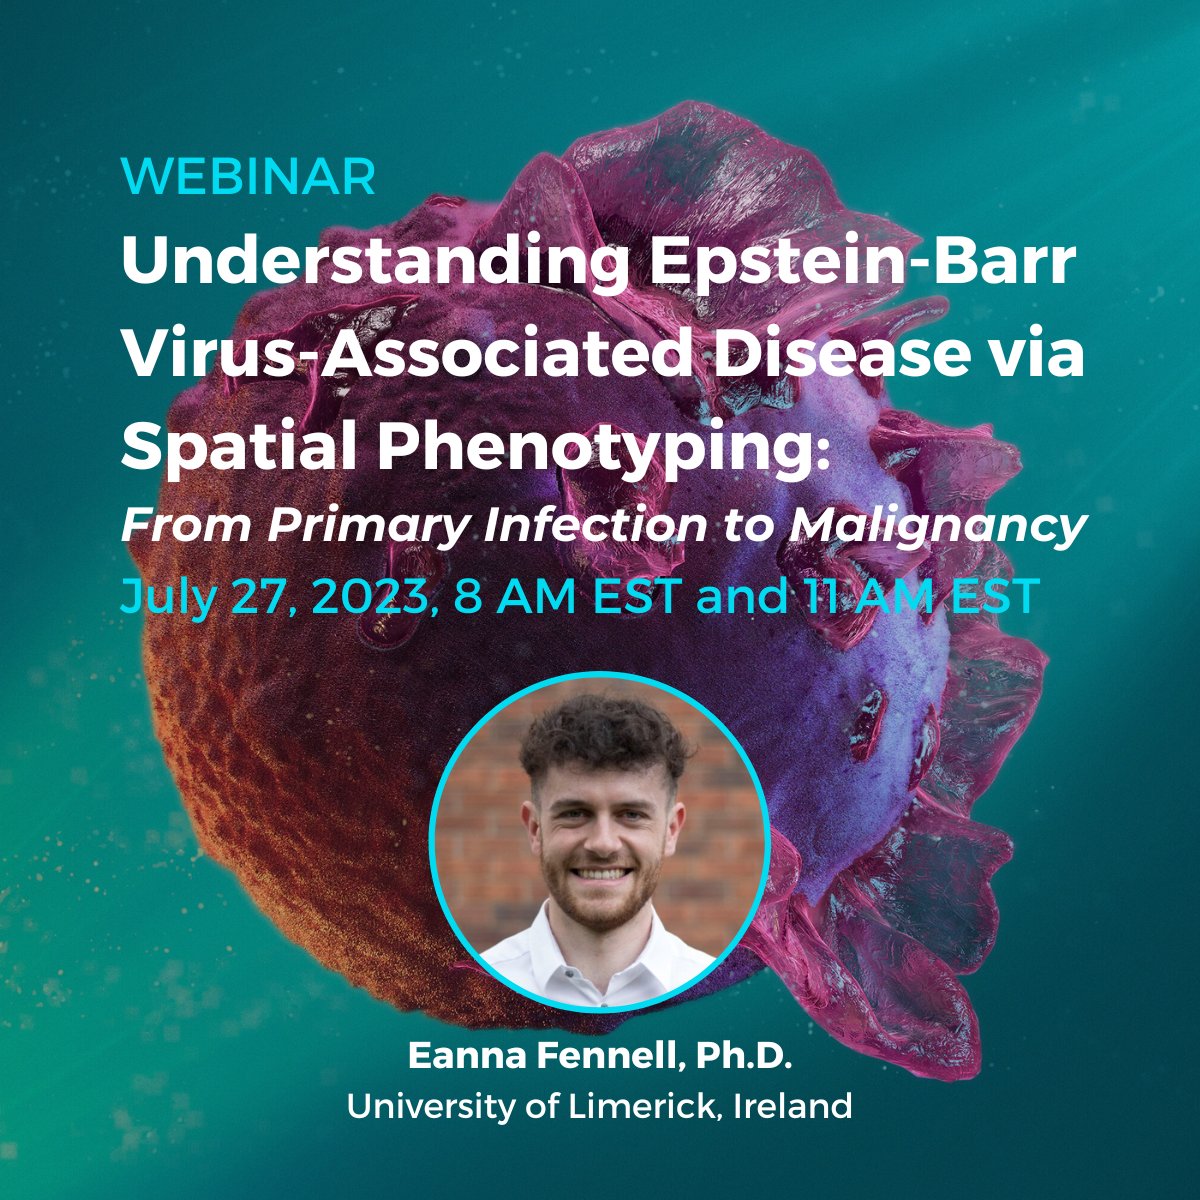 How is #spatialphenotyping uniquely suited to outline one of the putative causative relationships between #EpsteinBarrvirus infections, immunosuppression & cancer?

Tune in on July 27th to hear @EannaFennell answer questions like this and more. bit.ly/3O8BhJ1 #EBV